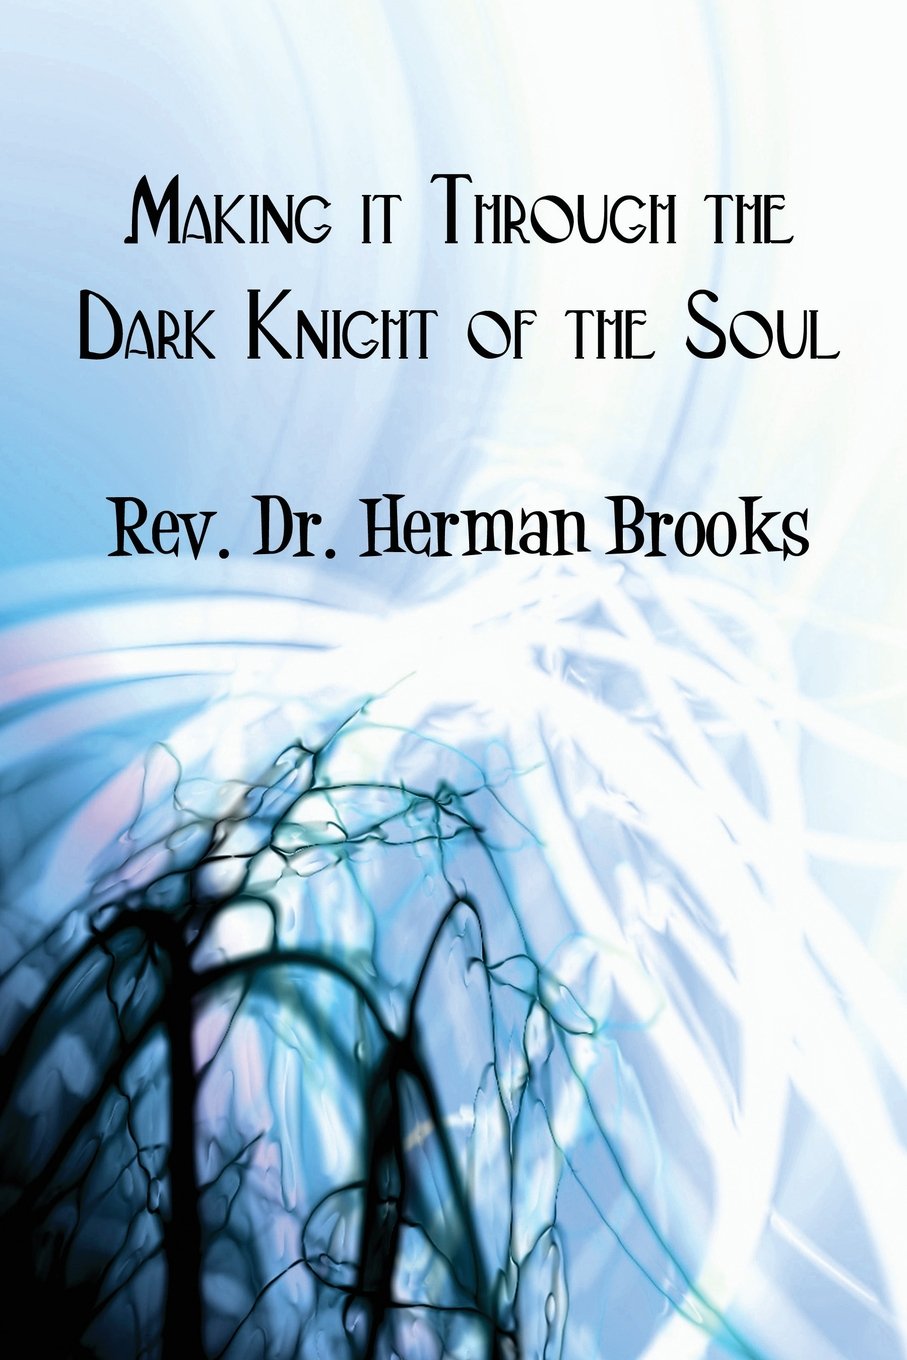 Making It Through the Dark Night of the Soul by Dr. Herman Brooks